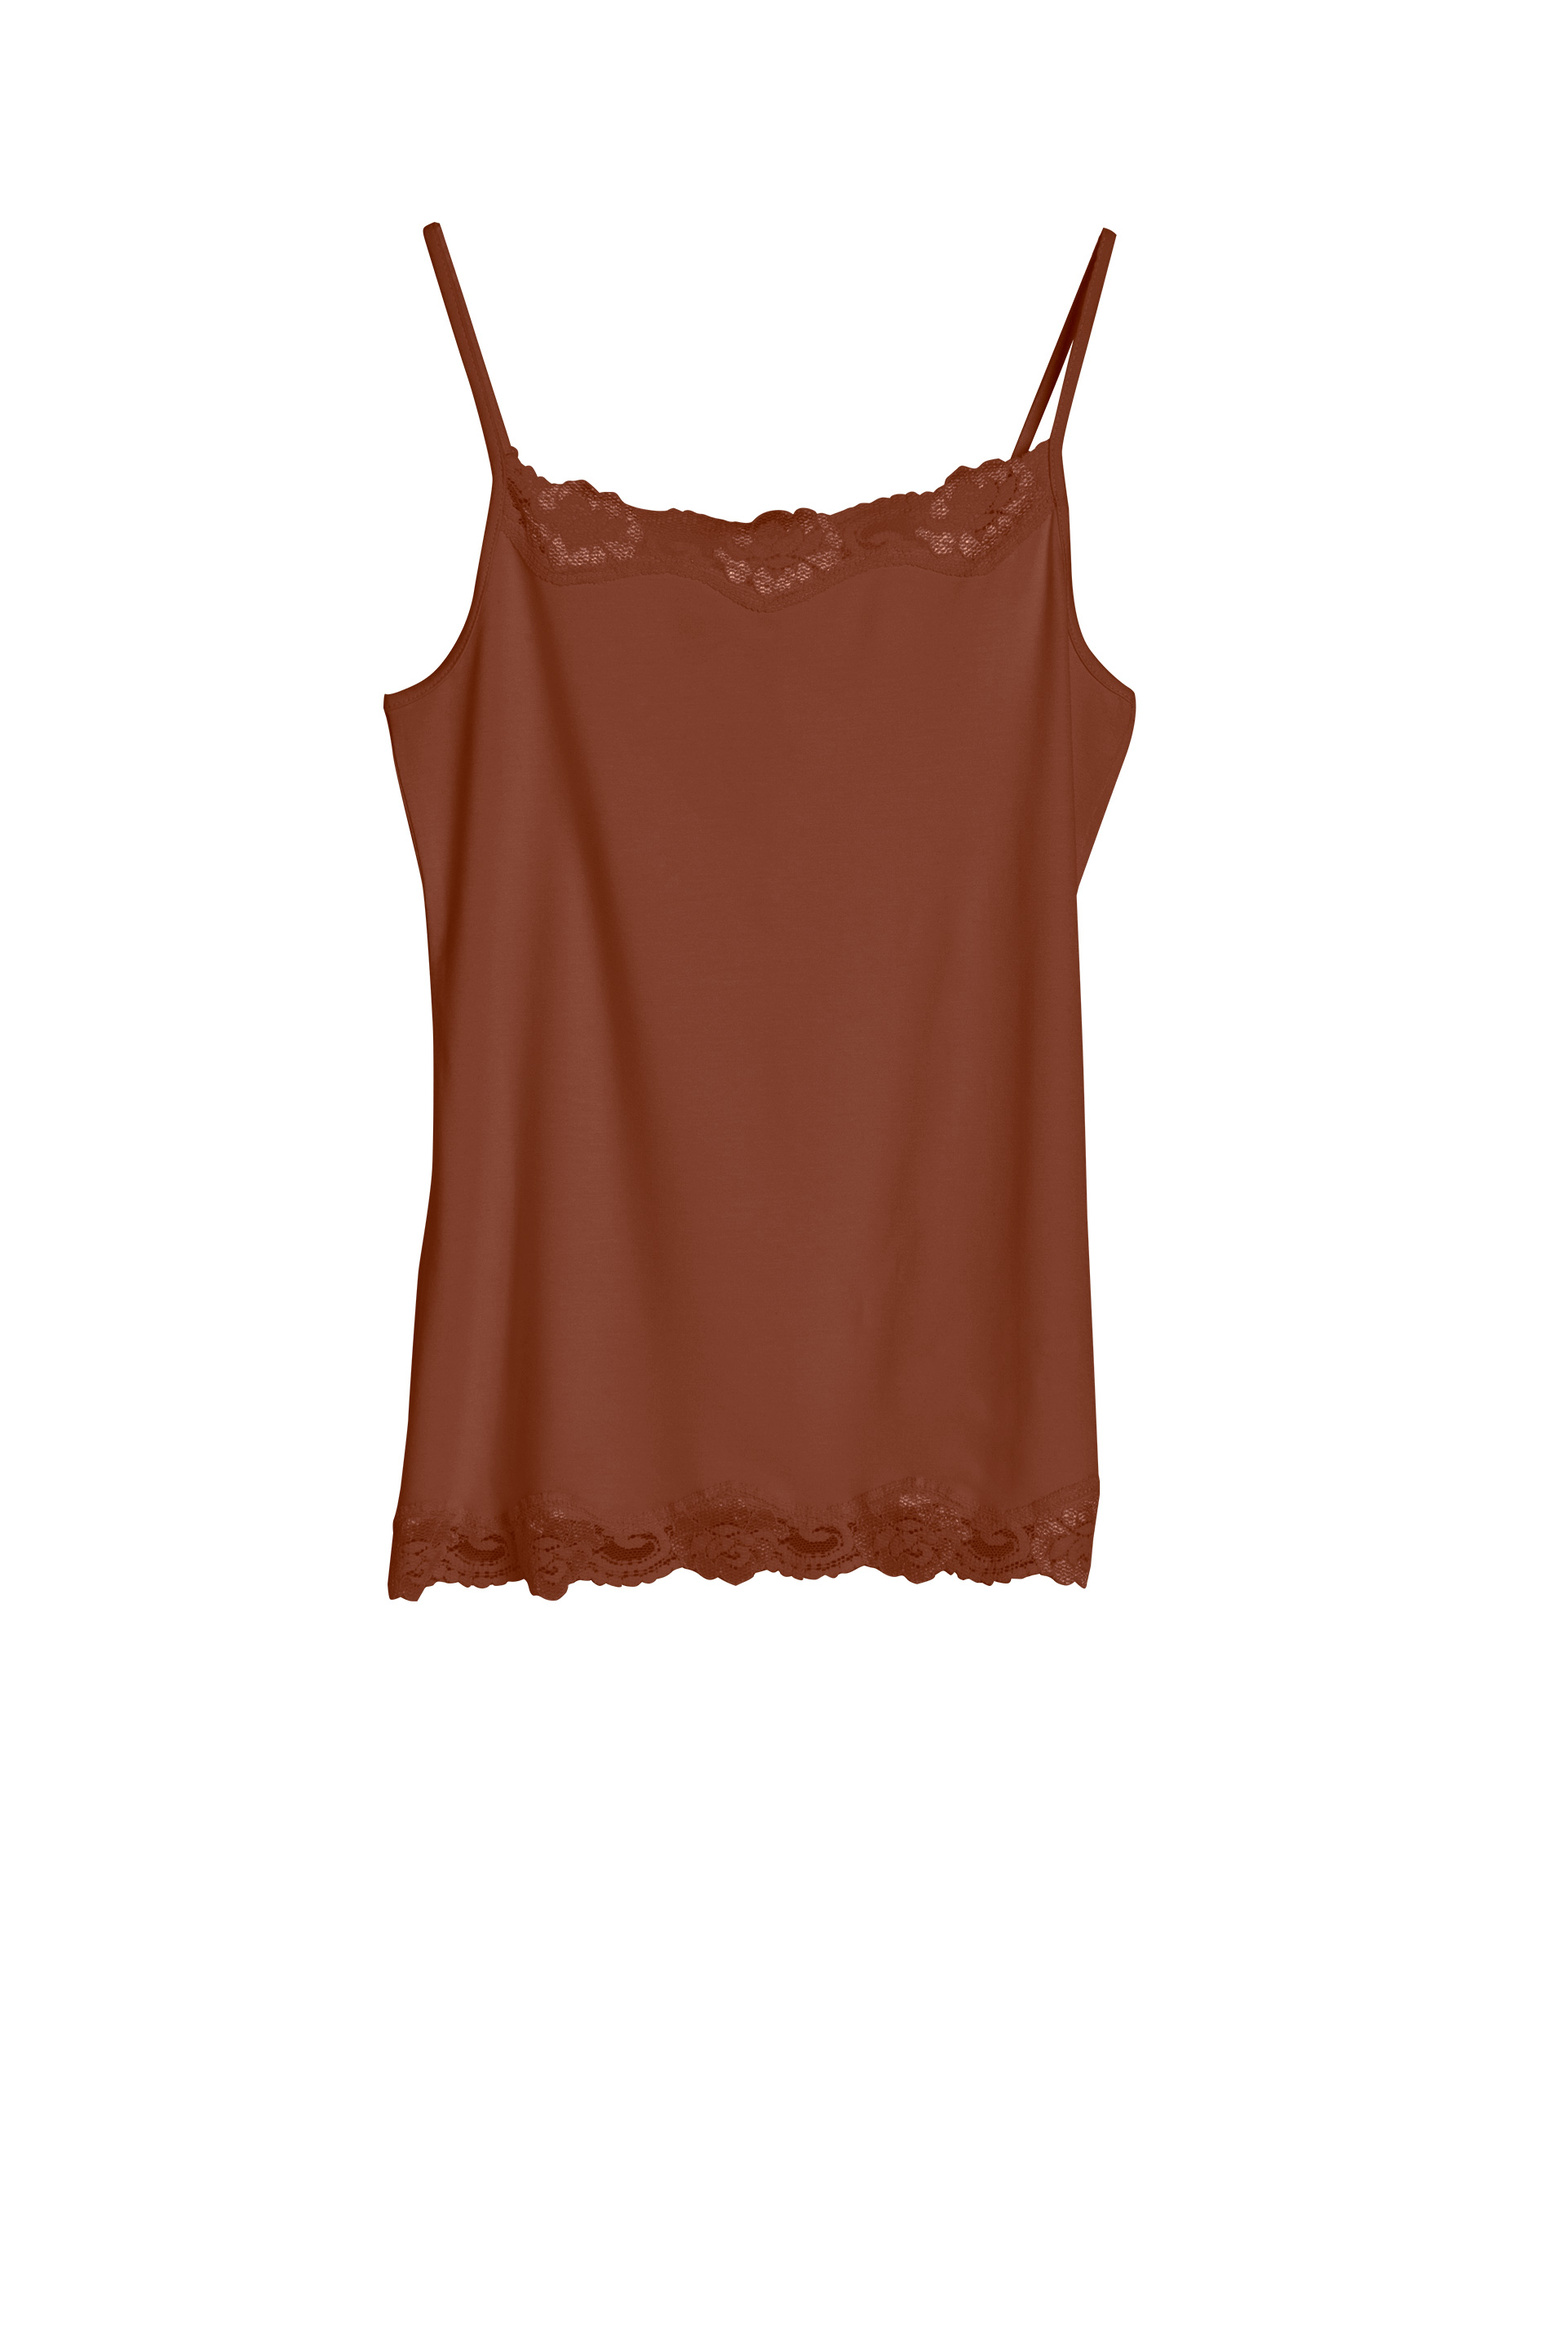 7200_lace_camisole_rocky_road.jpg